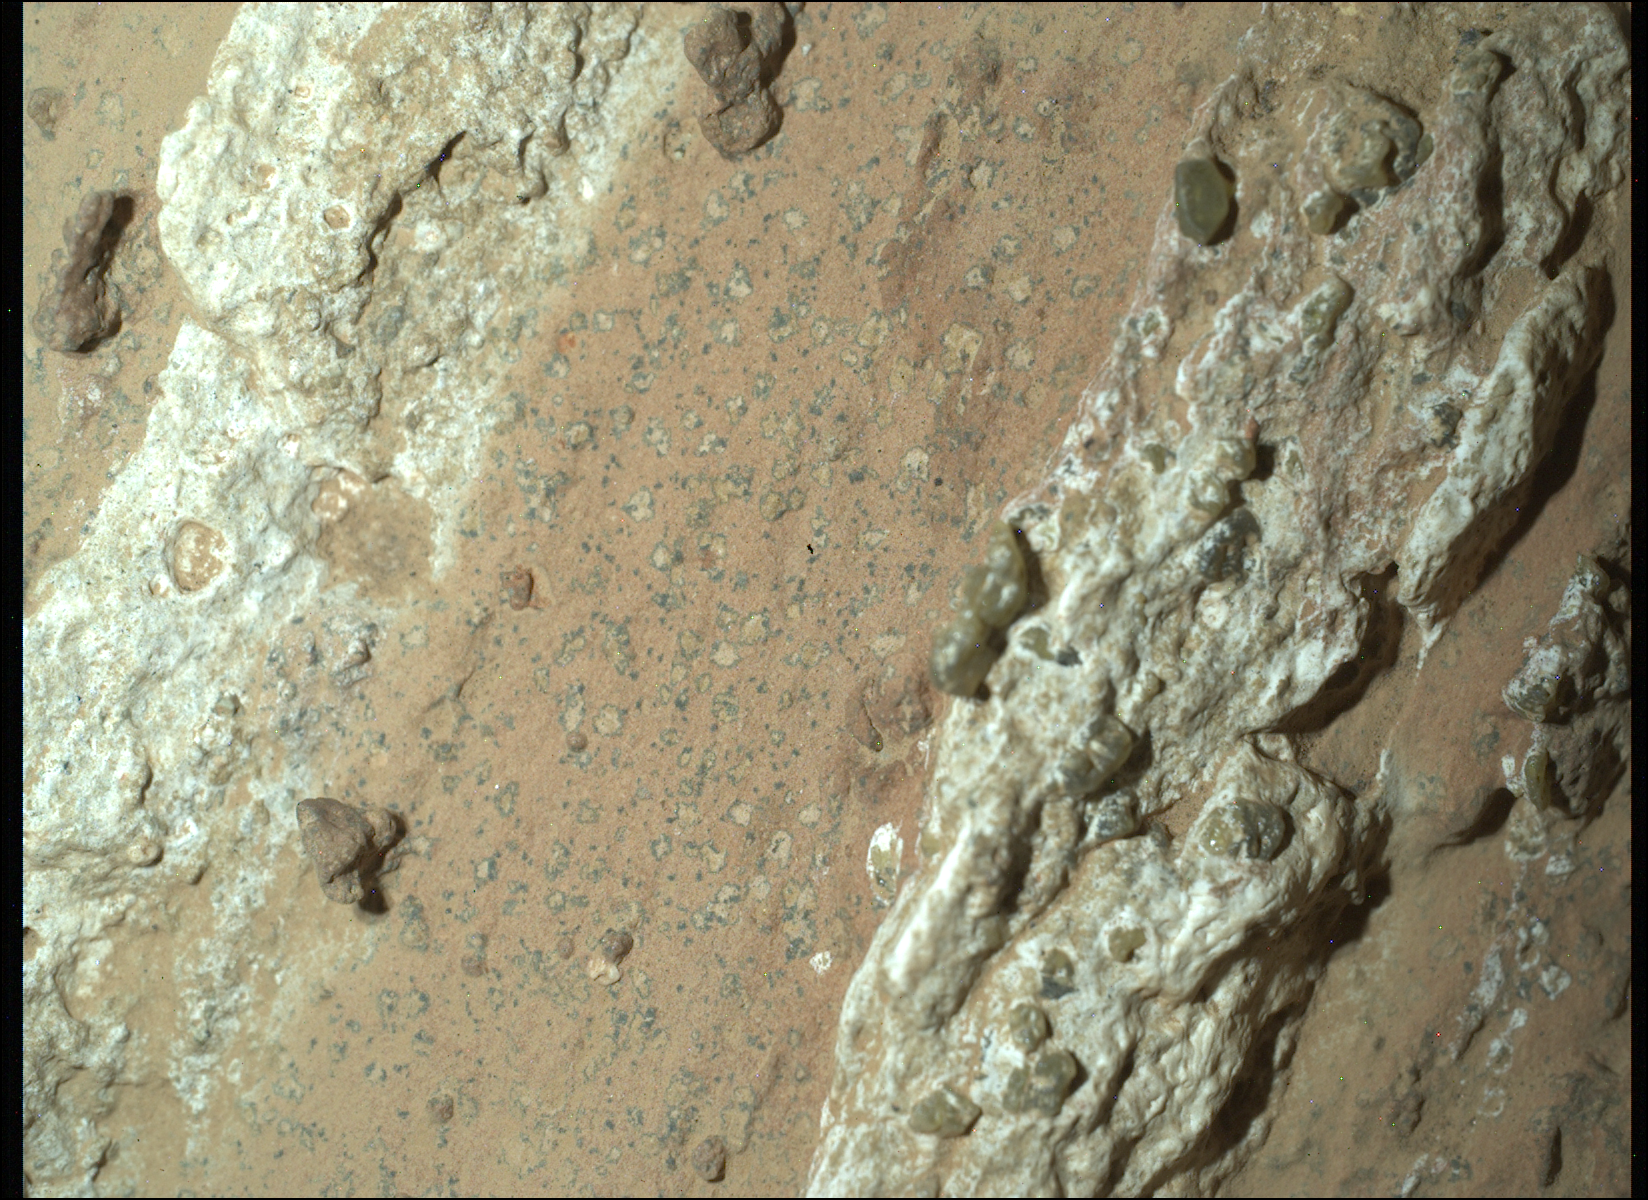 A full version of the image in the header, showing a close up of the rock.